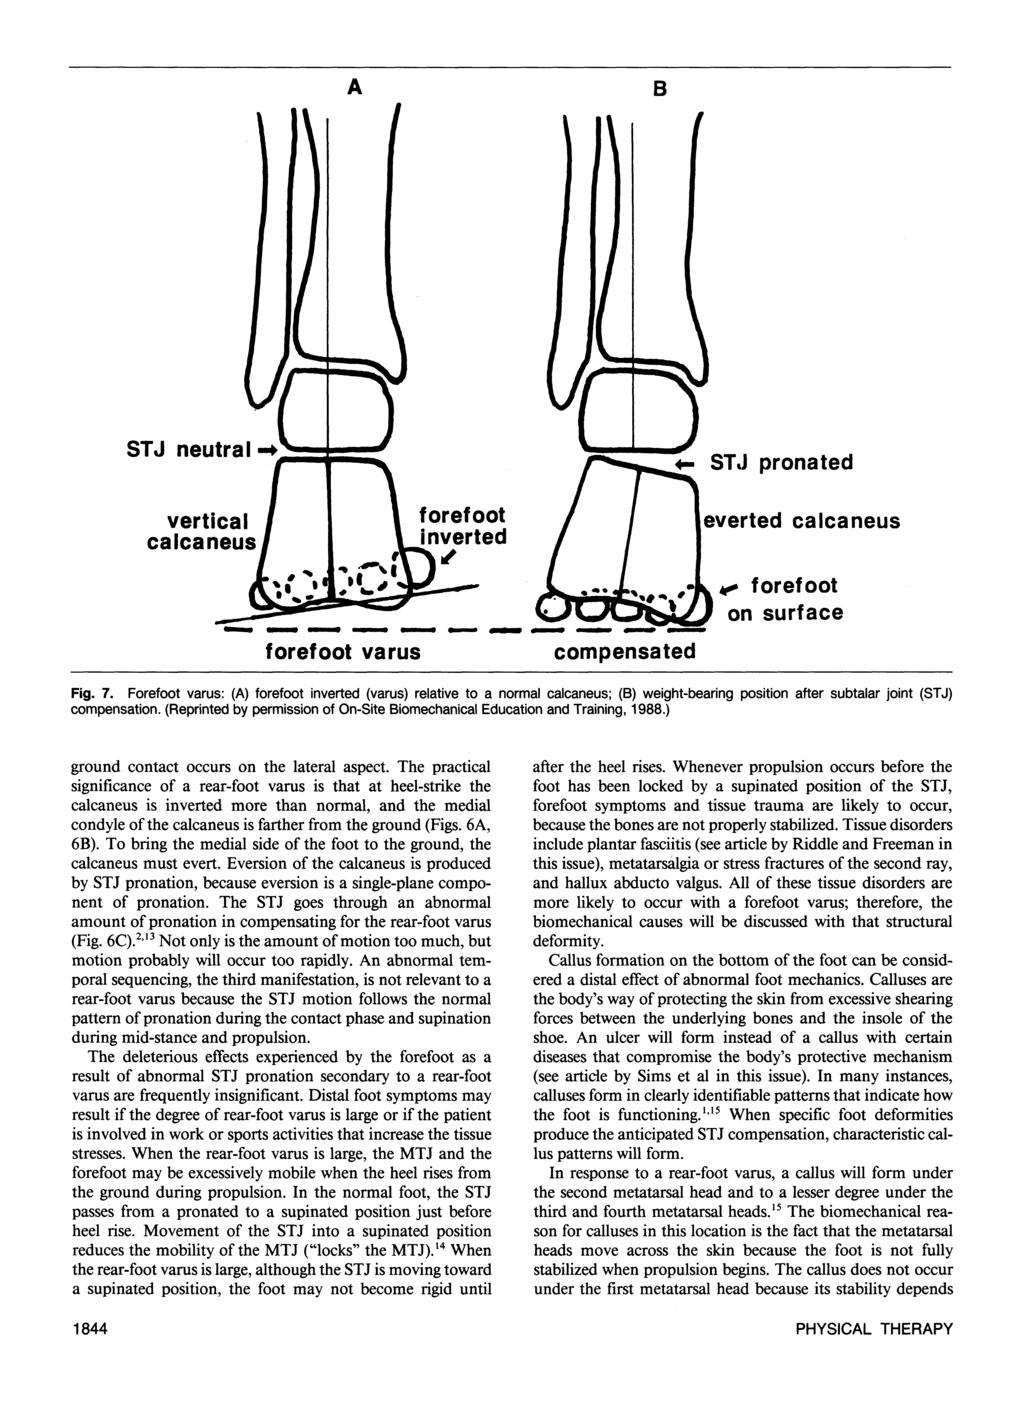 Fig. 7. Forefoot varus: (A) forefoot inverted (varus) relative to a normal calcaneus; (B) weight-bearing position after subtalar joint (STJ) compensation.